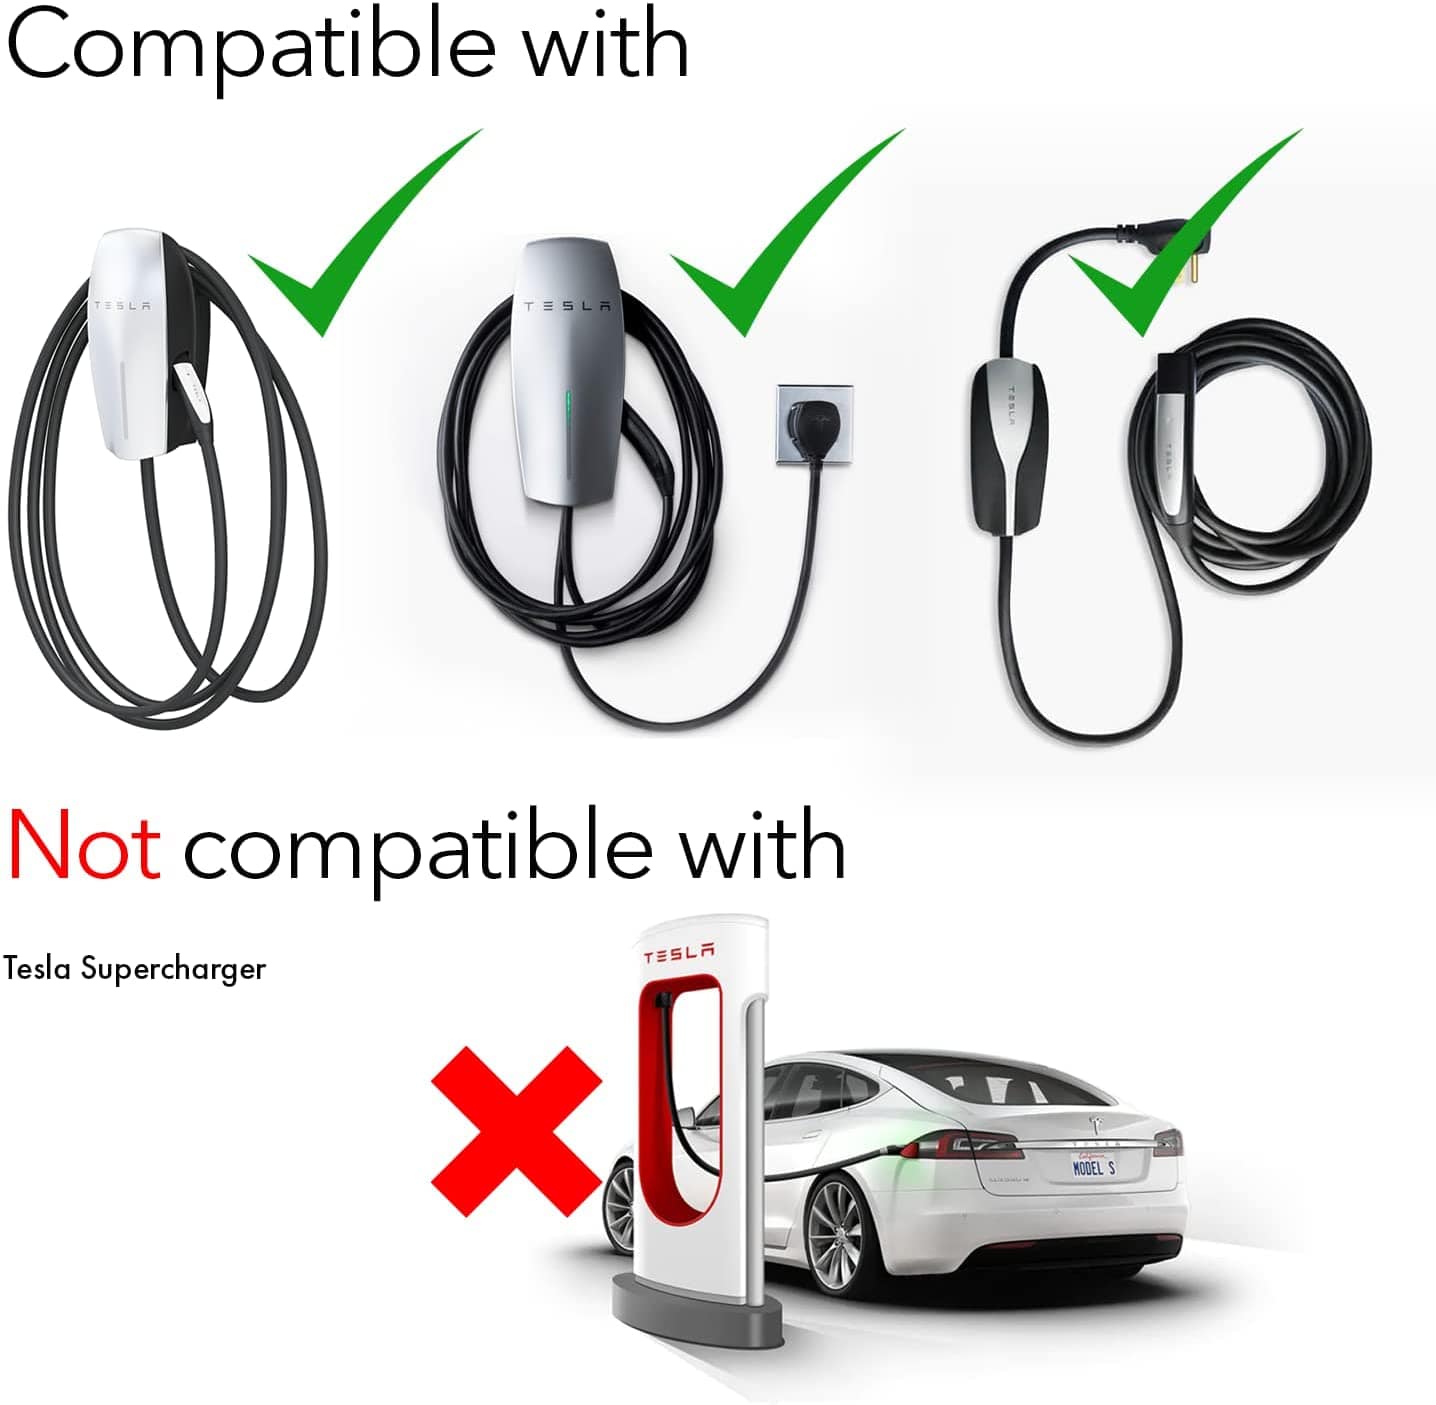 Kies-Motorsports Lectron Lectron - Tesla to J1772 Charging Adapter, Max 48A & 250V for Tesla High Powered Connectors, Destination Chargers, and Mobile Connectors